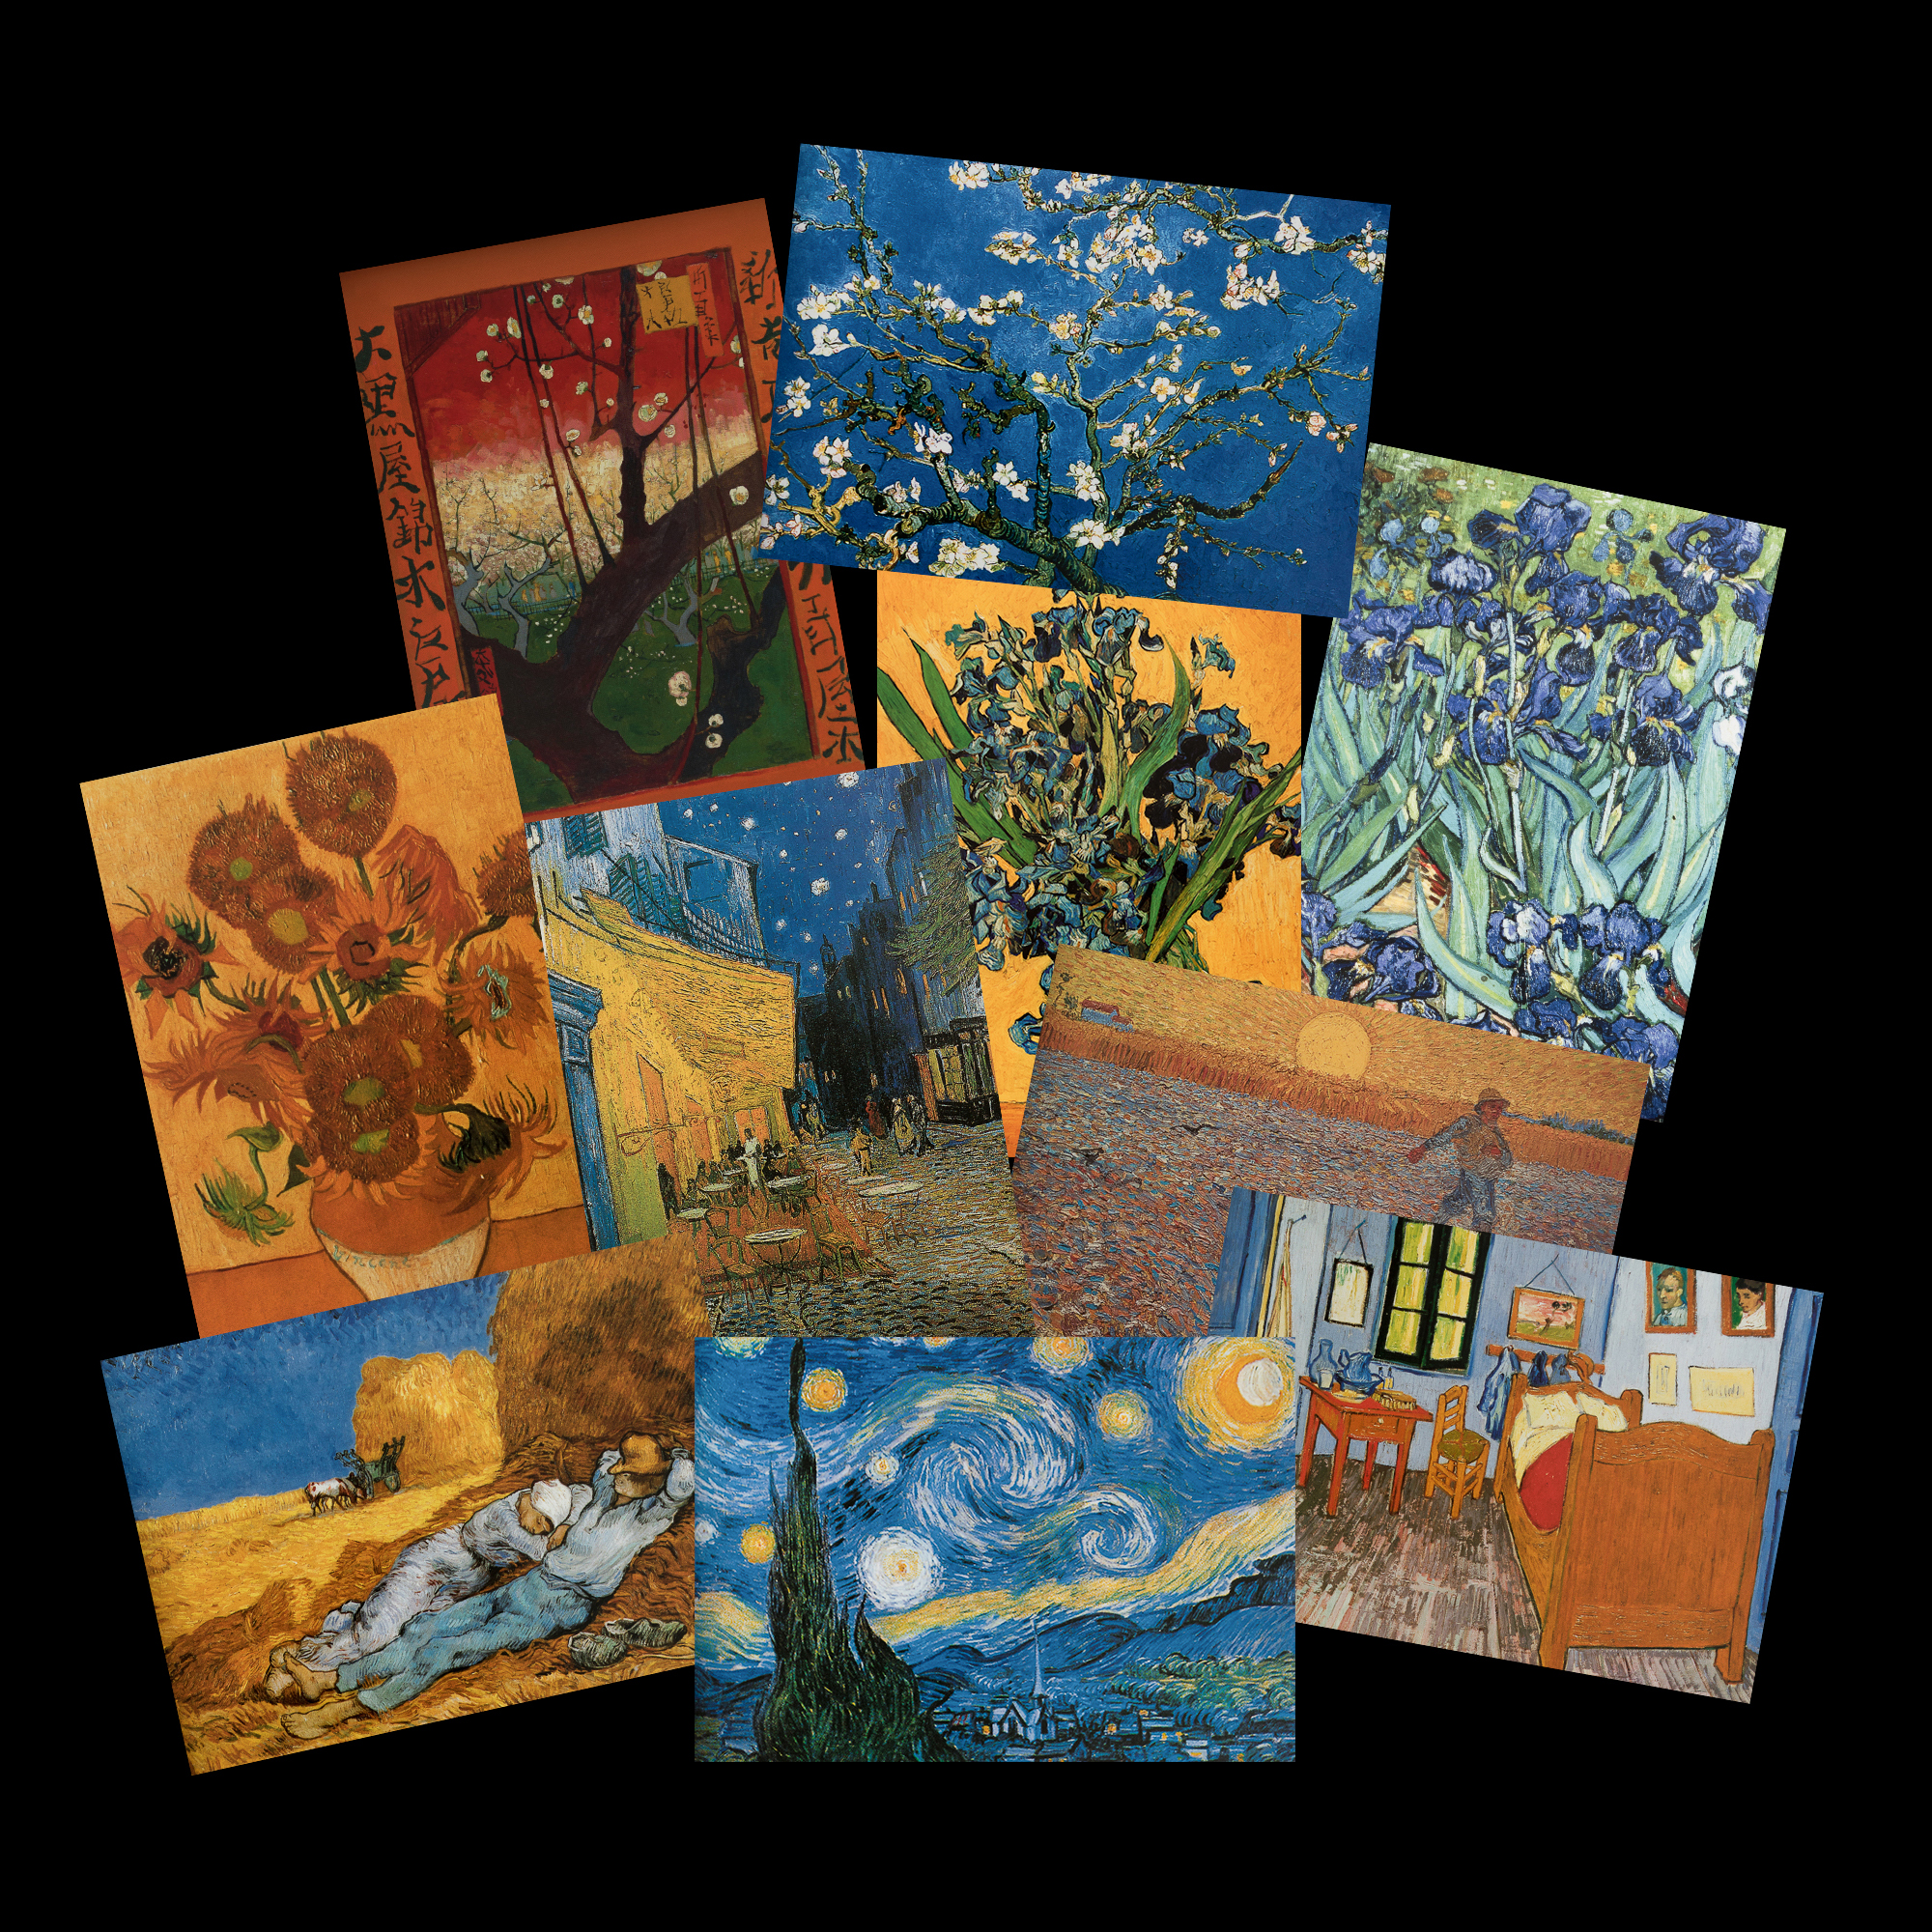 LOT OF 7 POSTCARDS OF VINCENT VAN GOGH PAINTINGS 